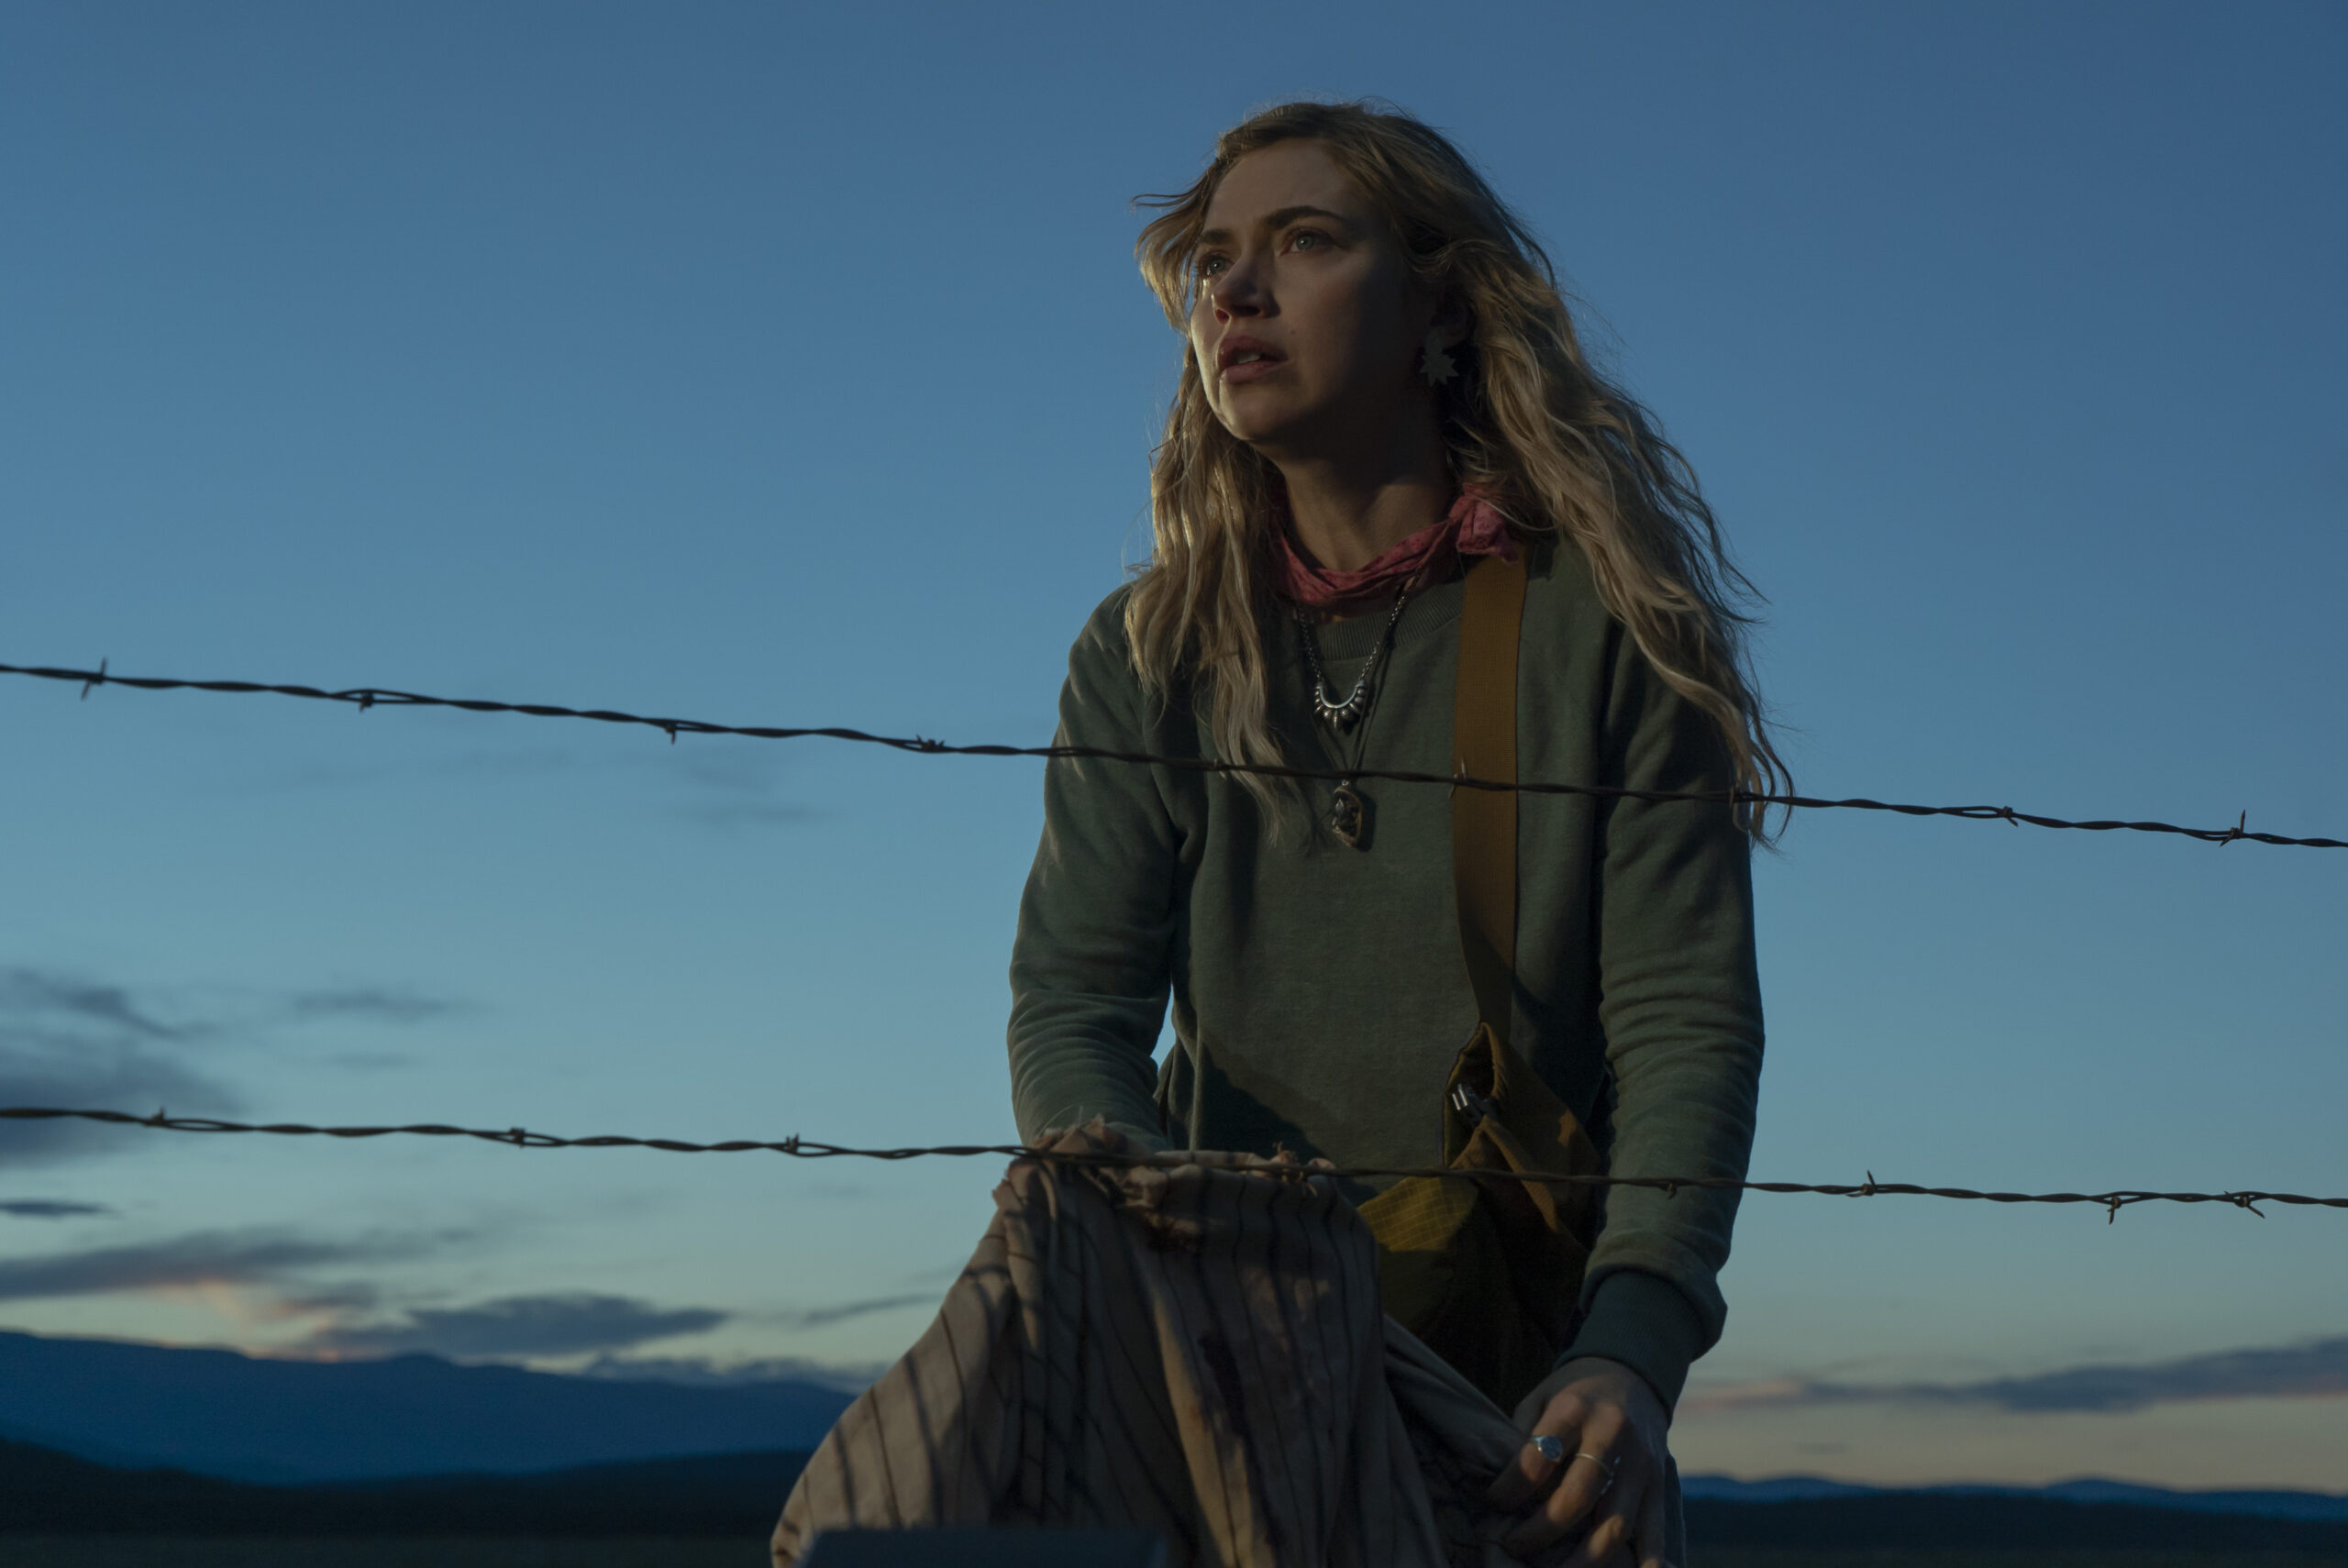 Outer Range - Imogen Poots